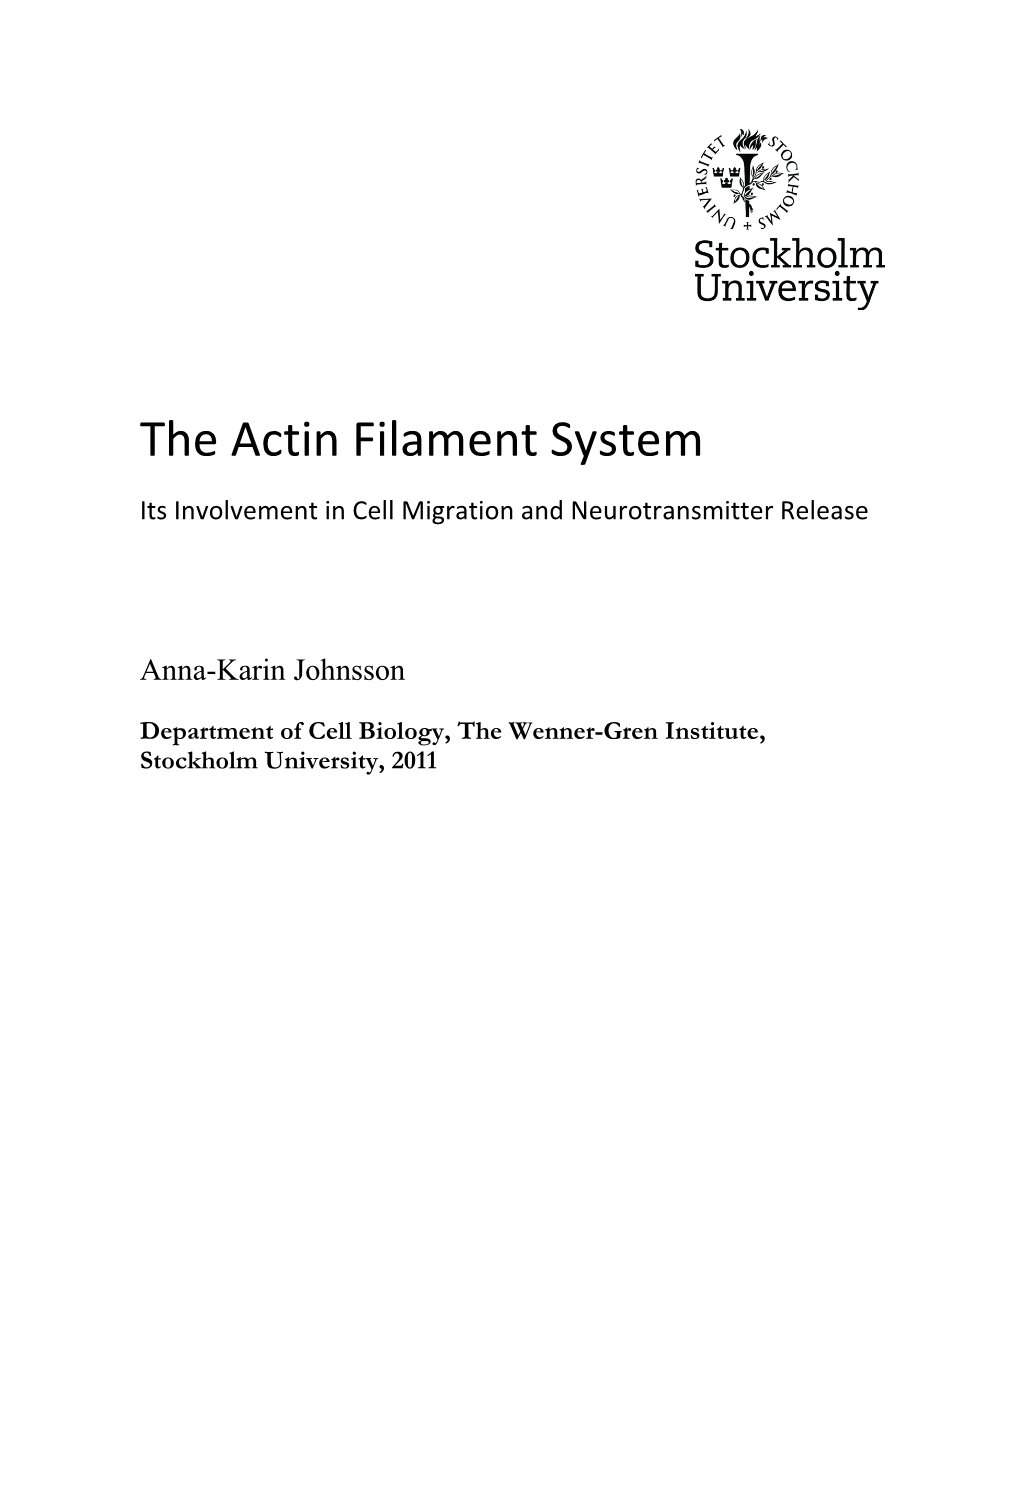 The Actin Filament System Its Involvement in Cell Migration and Neurotransmitter Release